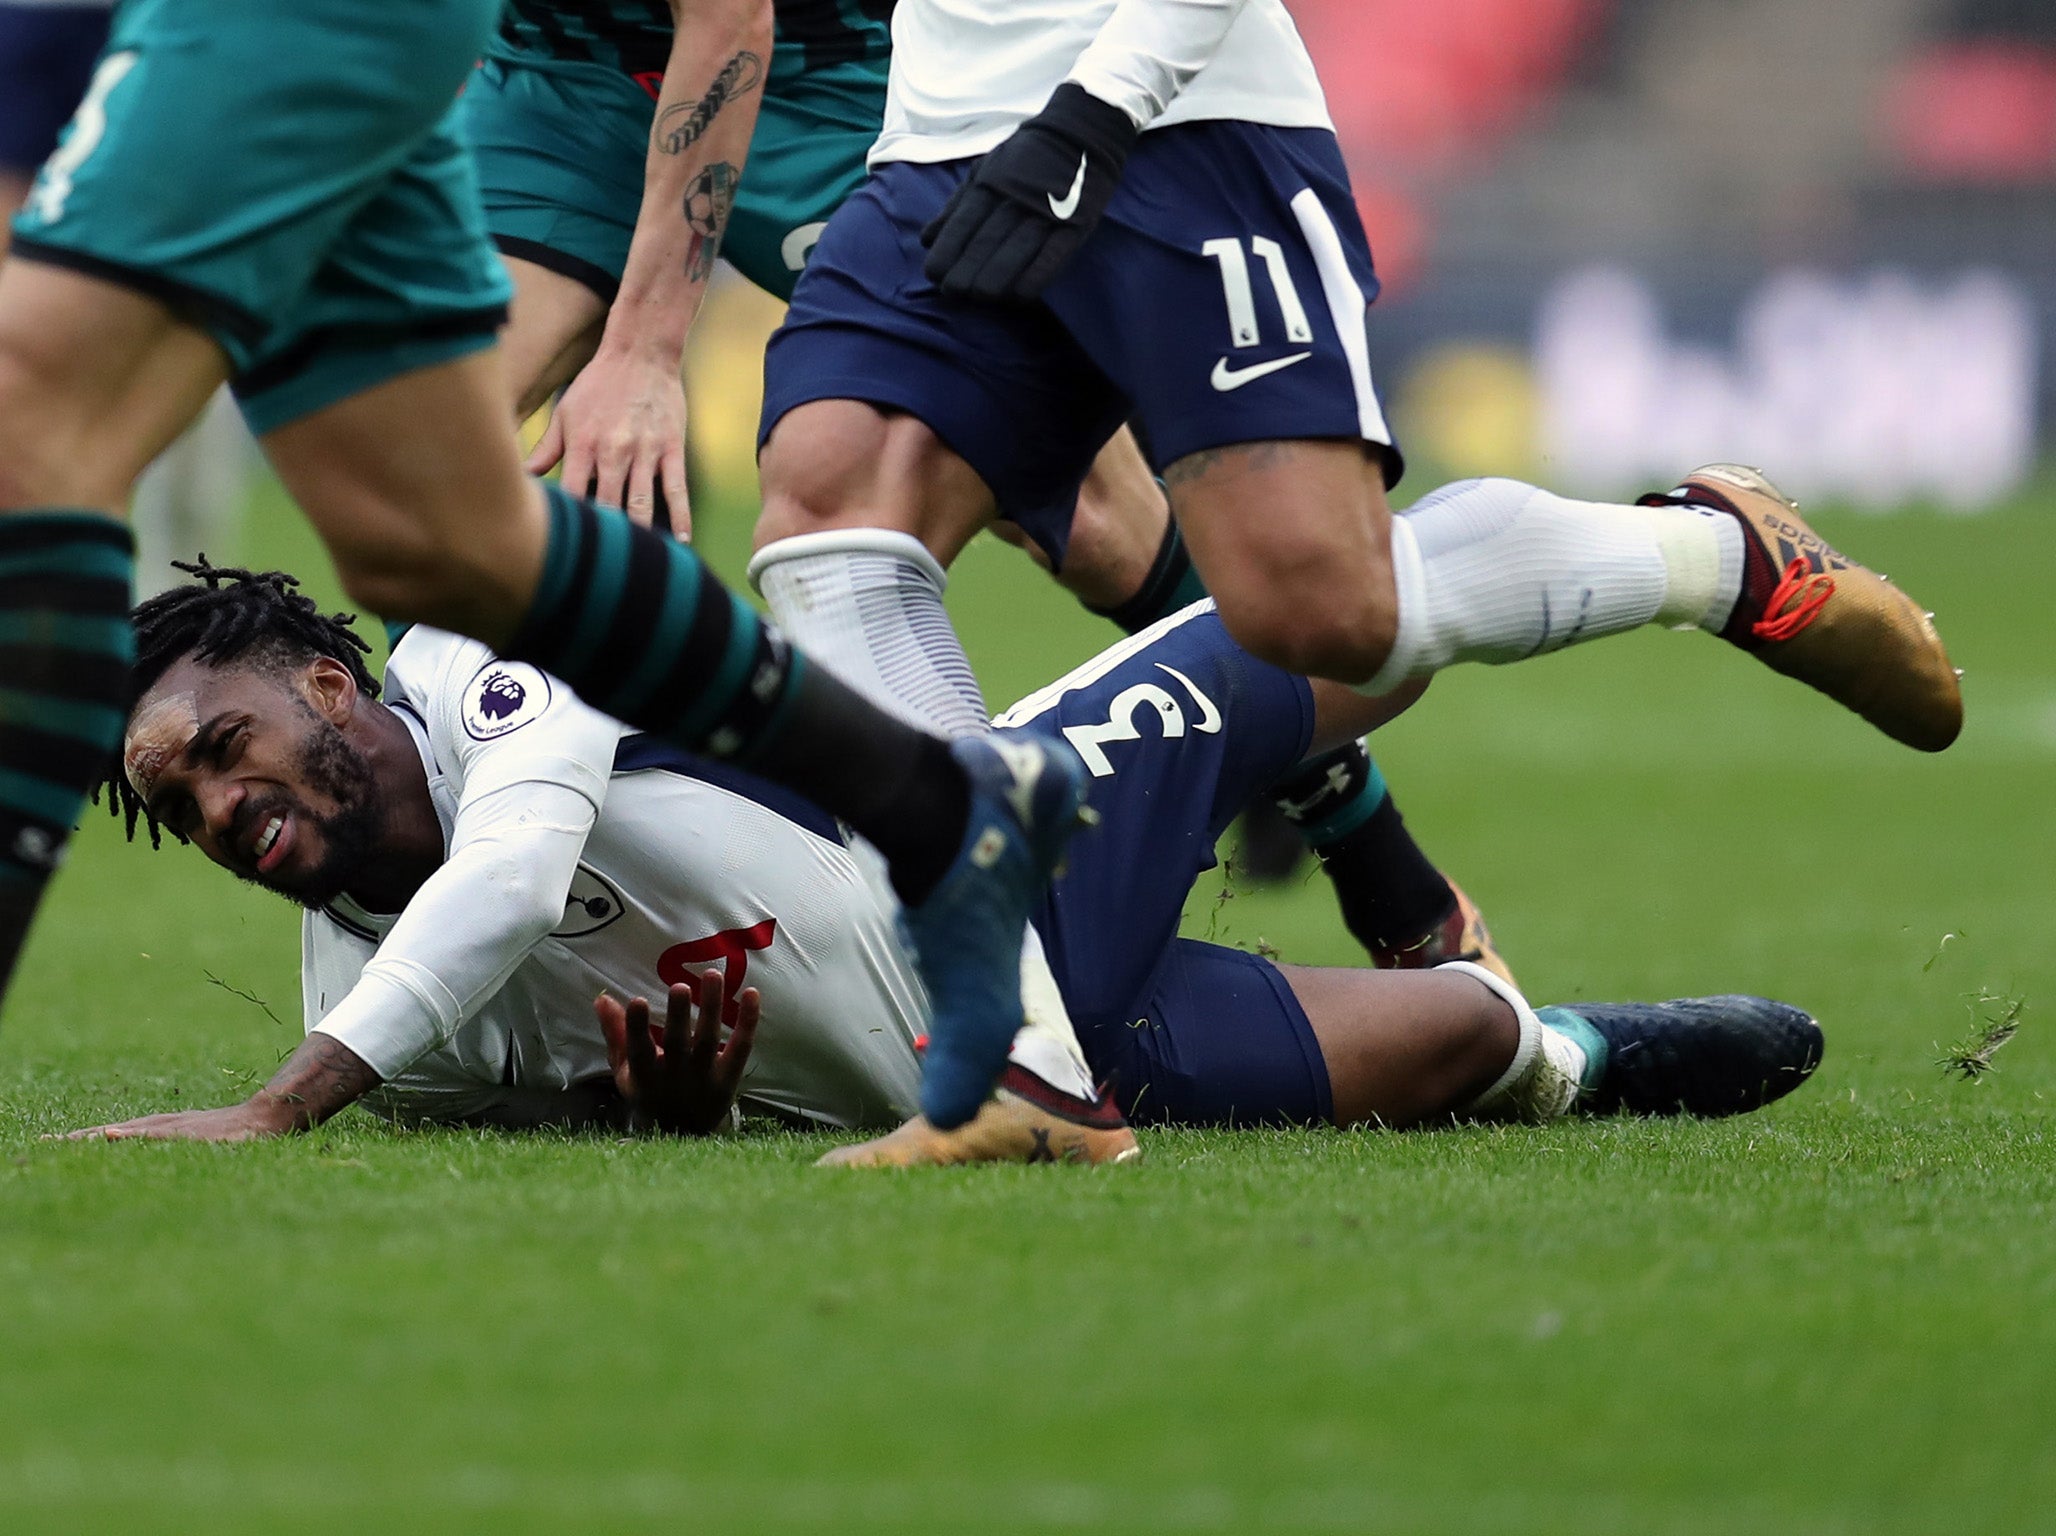 Danny Rose was unable to train following the win over Southampton on Boxing Day